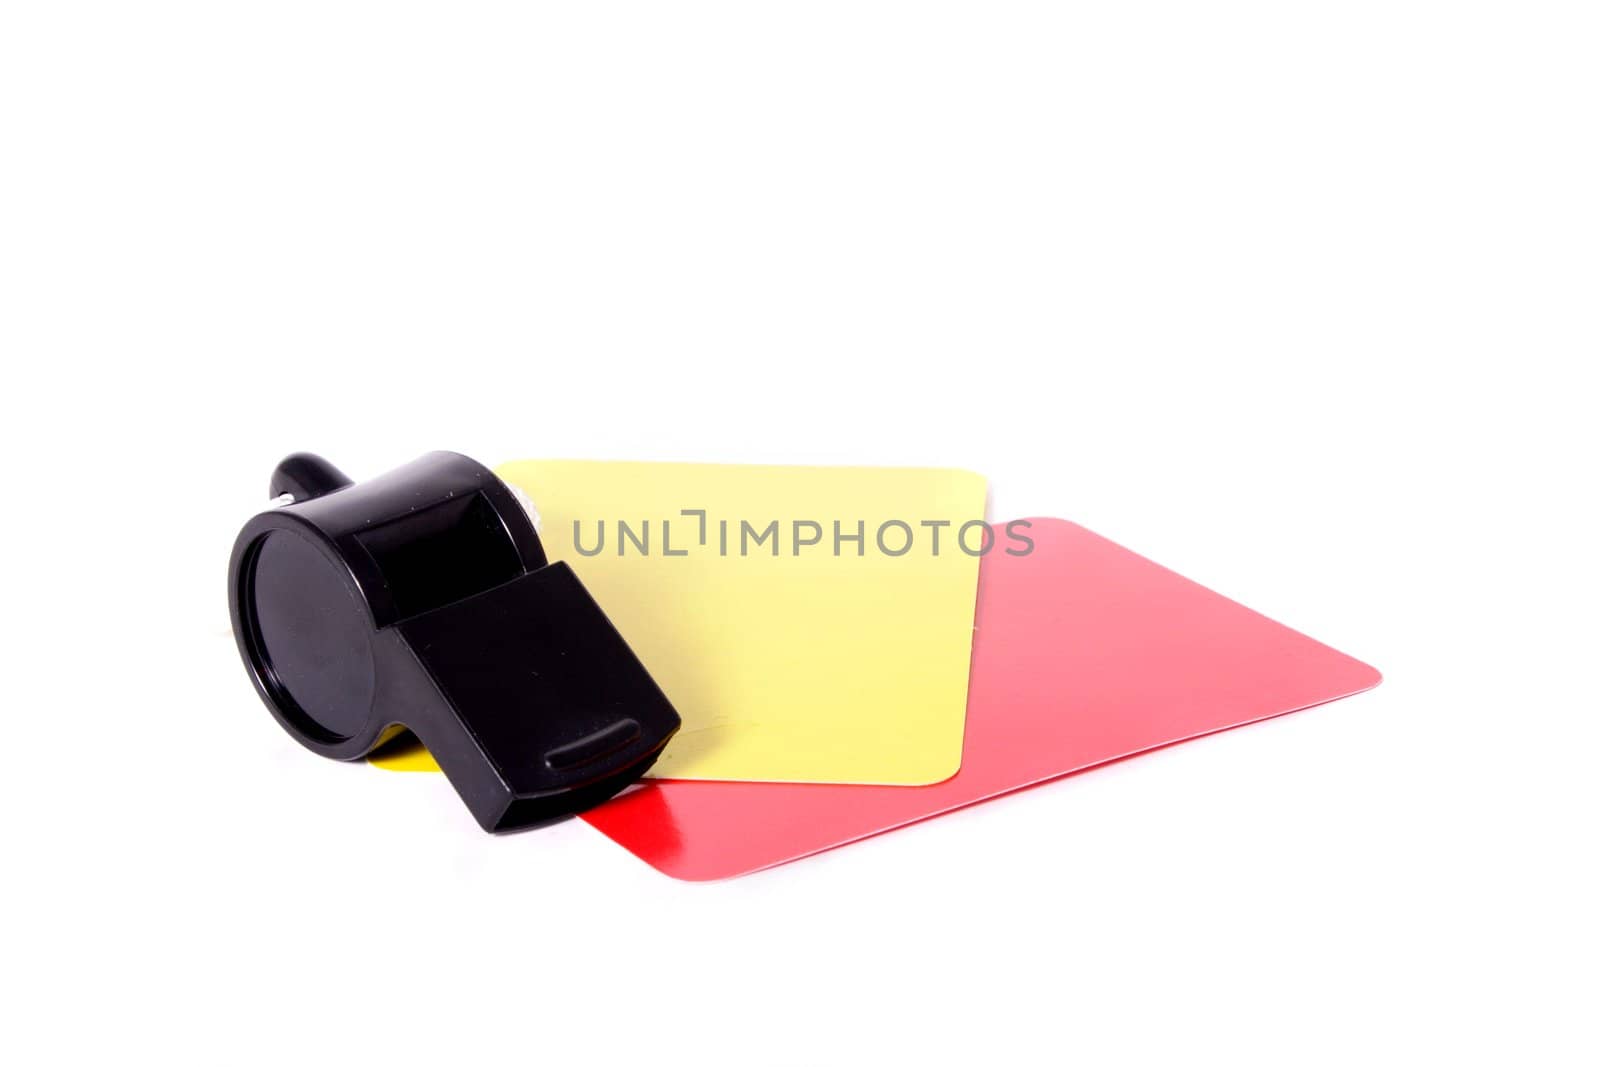 A yellow and red card lying next to a whistle. All isolated on white background.